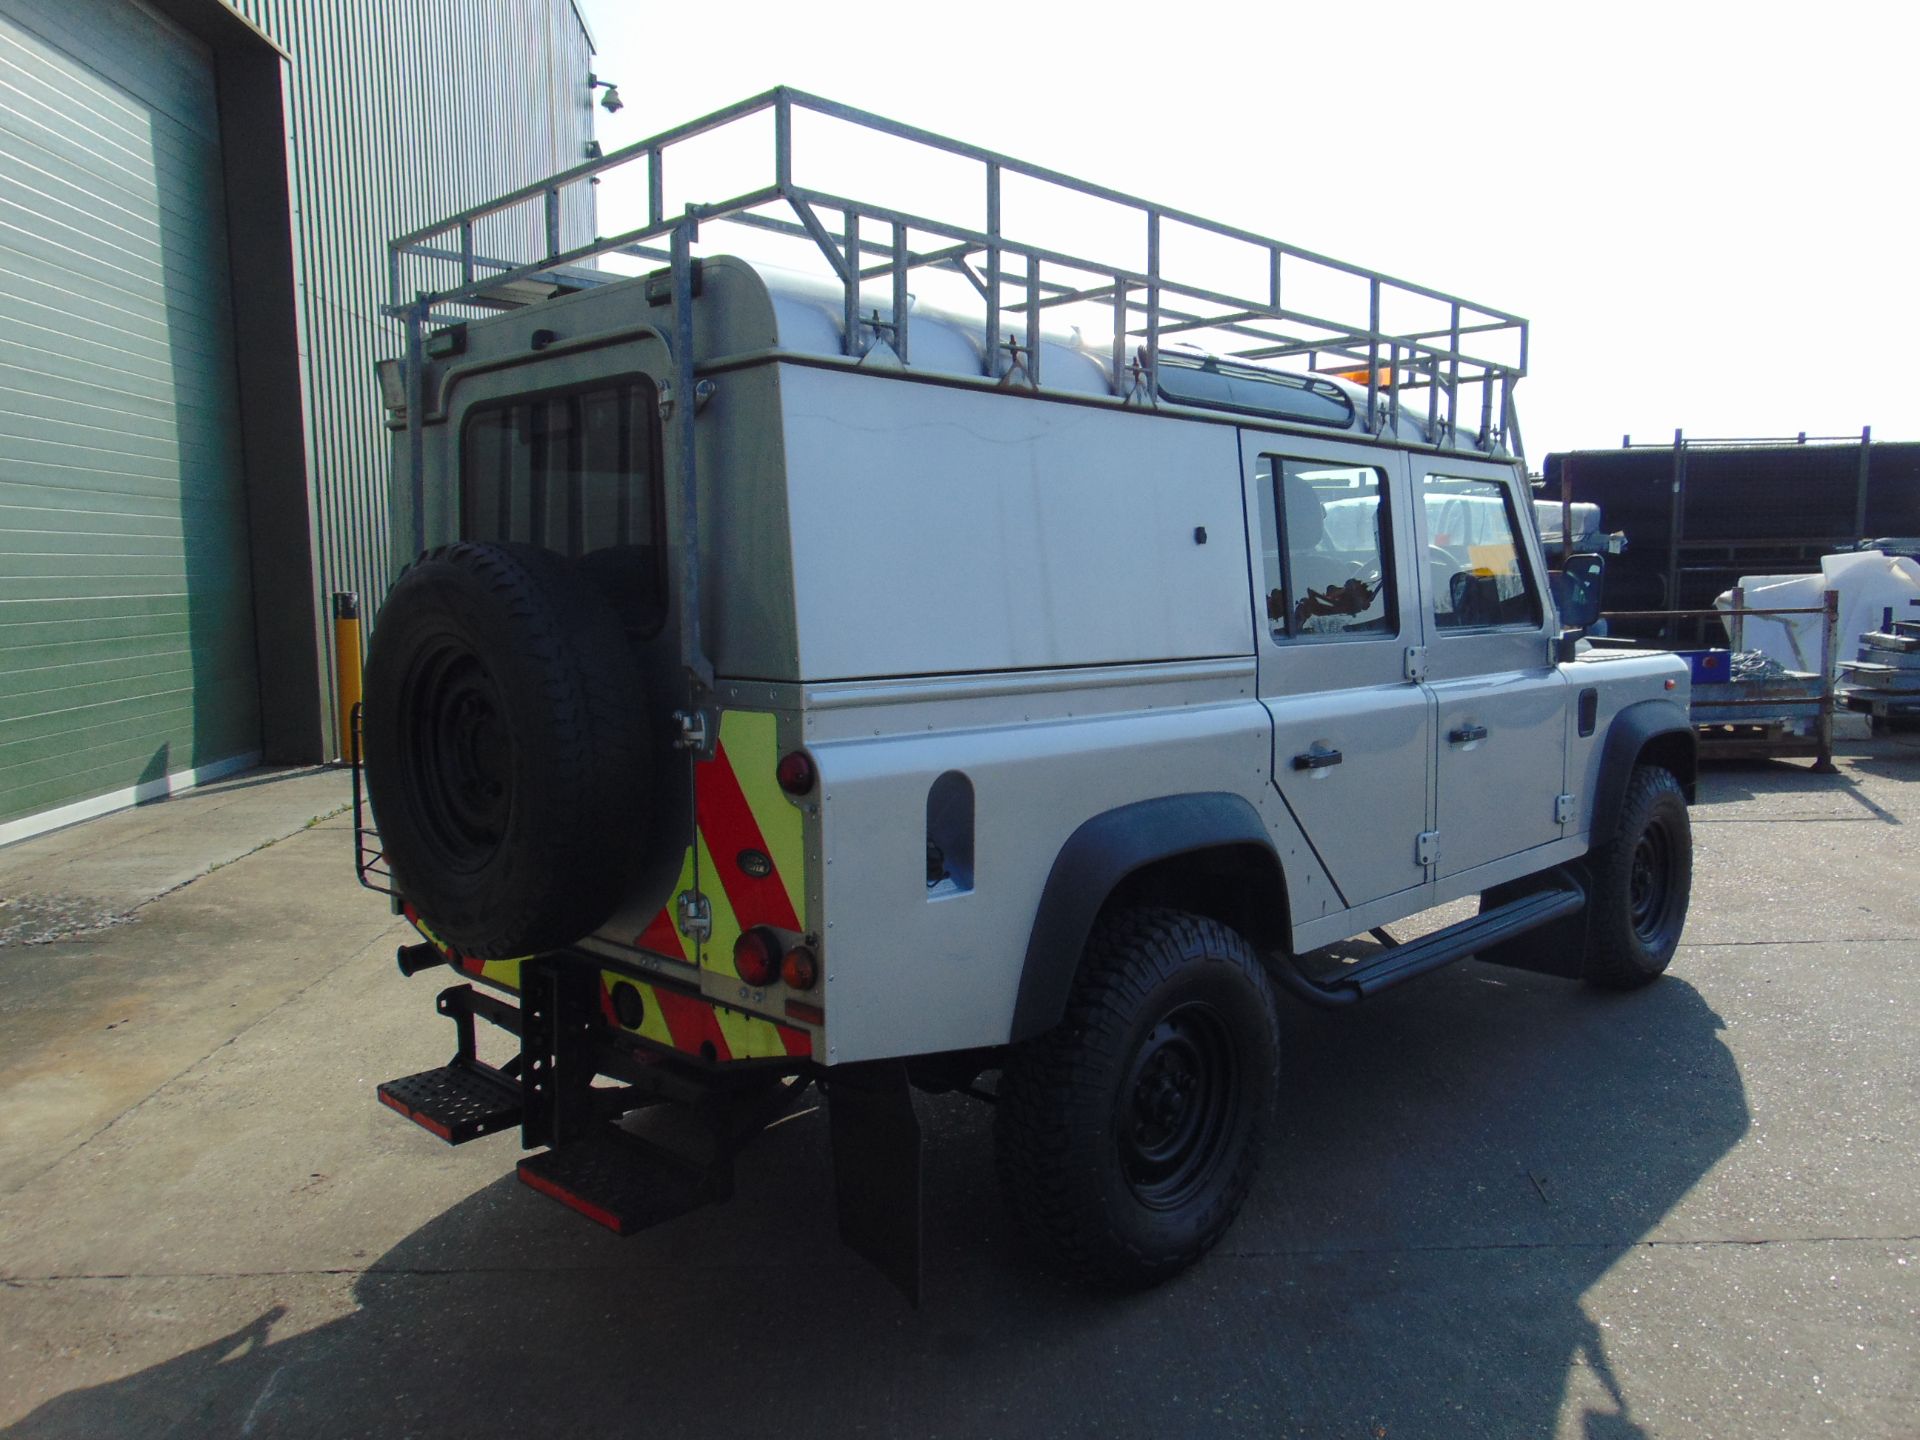 1 Owner 2013 Land Rover Defender 110 Utility 5 door 5 seater ONLY 83,117 MILES! - Image 6 of 33